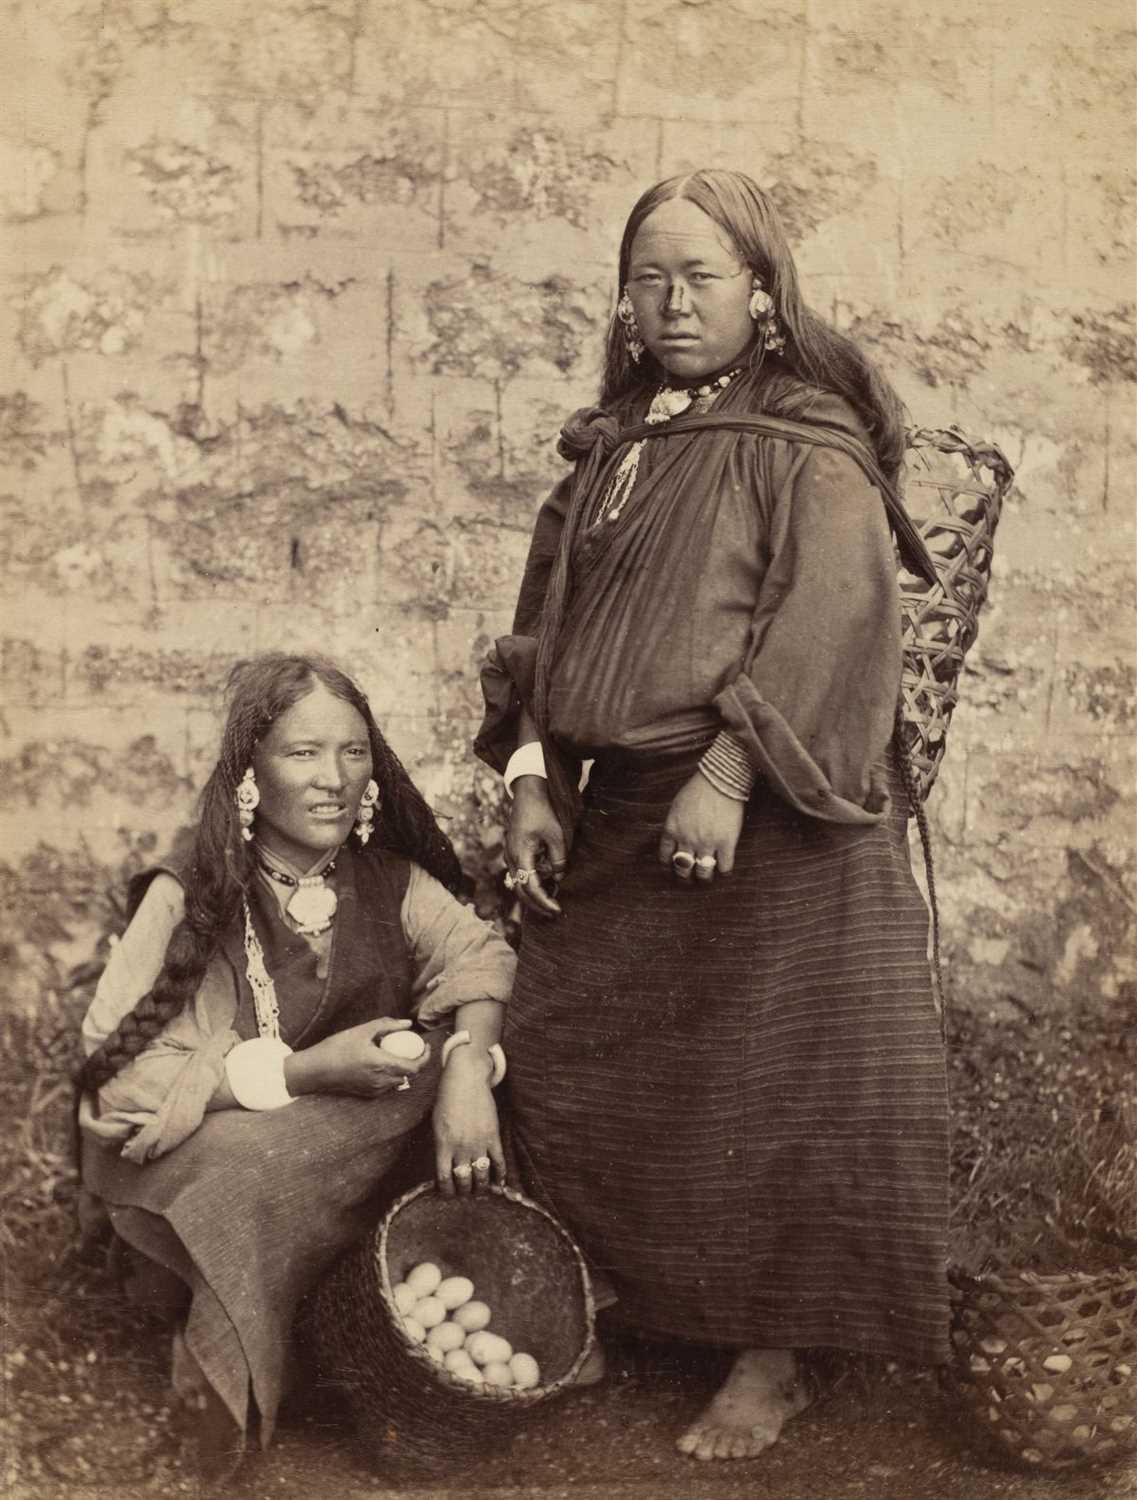 Lot 34 - Tibet. Two Bhoorka women selling eggs and butter, c. 1880s